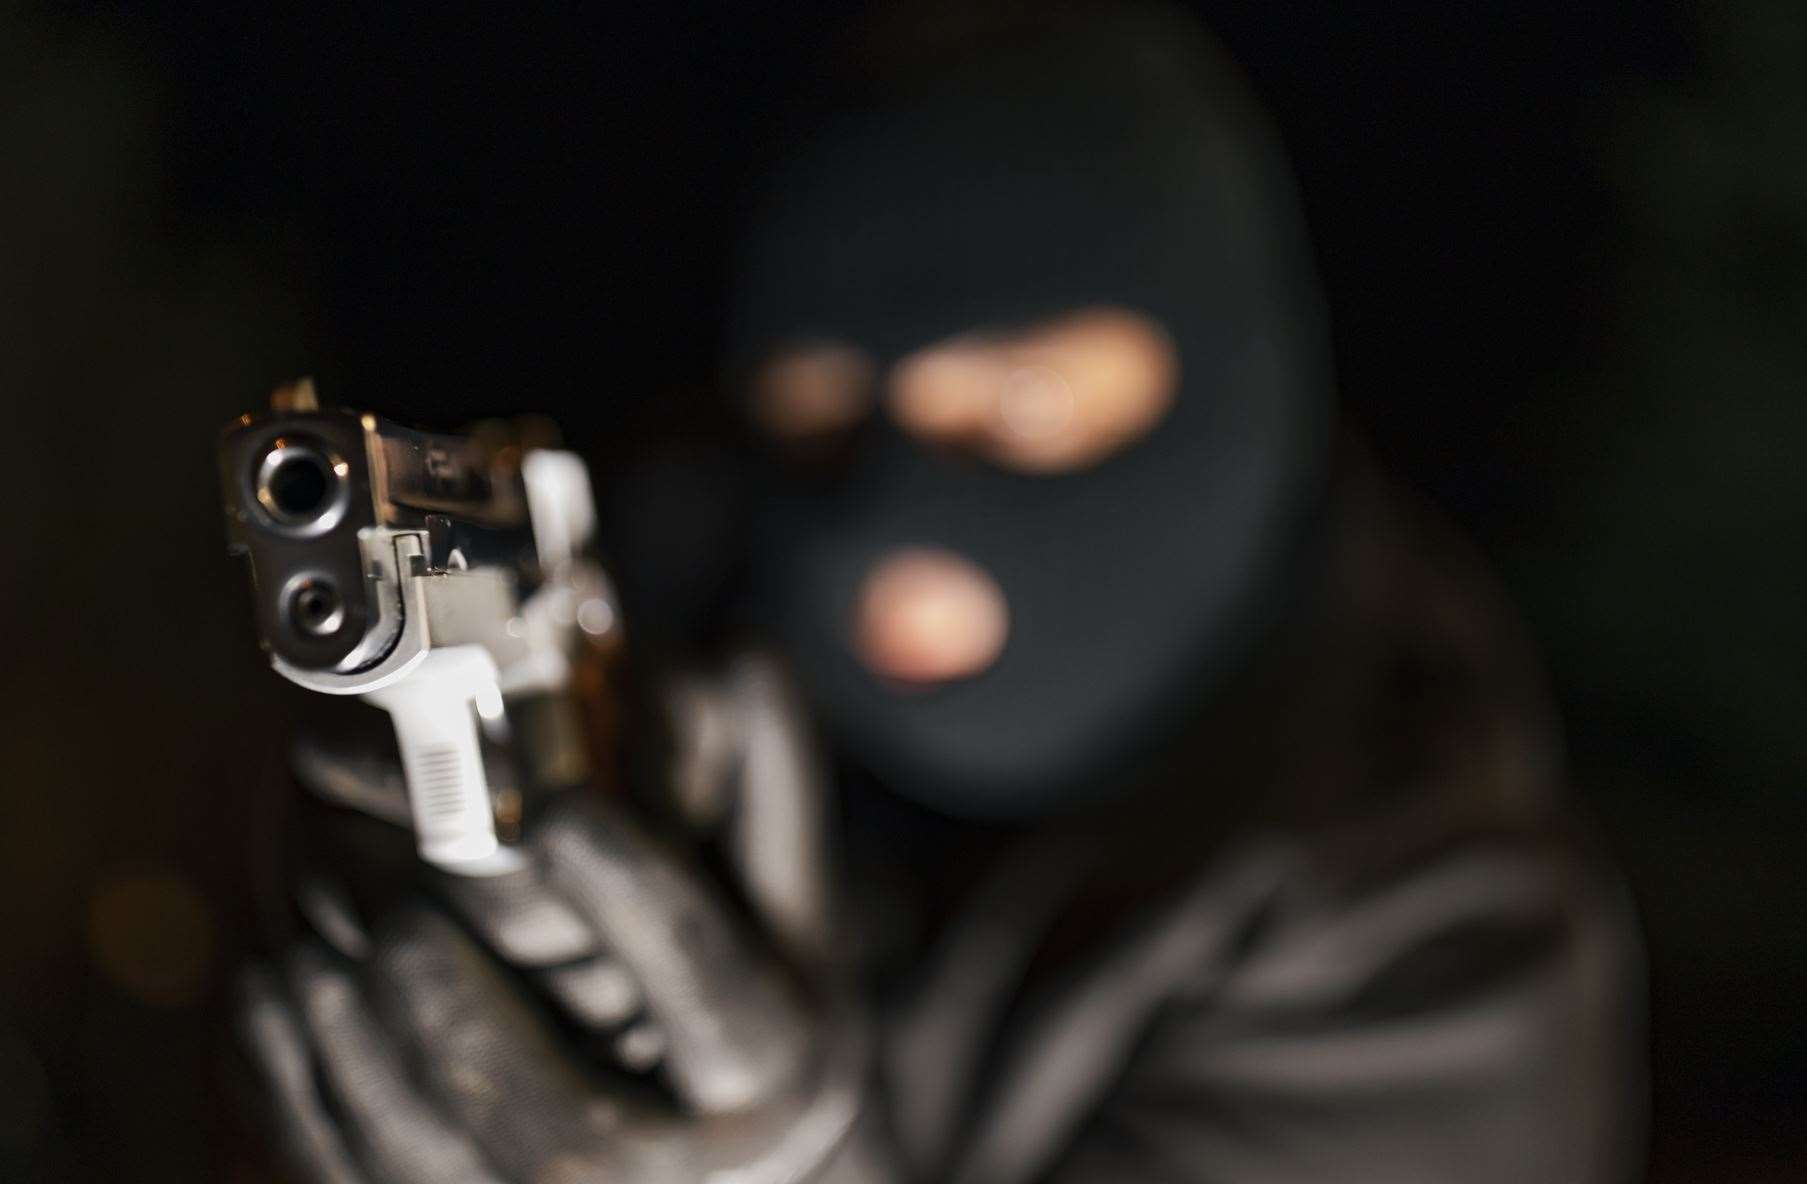 A couple woke up to find a burglar pointing a gun at them while they were in bed. Stock image: iStock/RealPeopleGroup